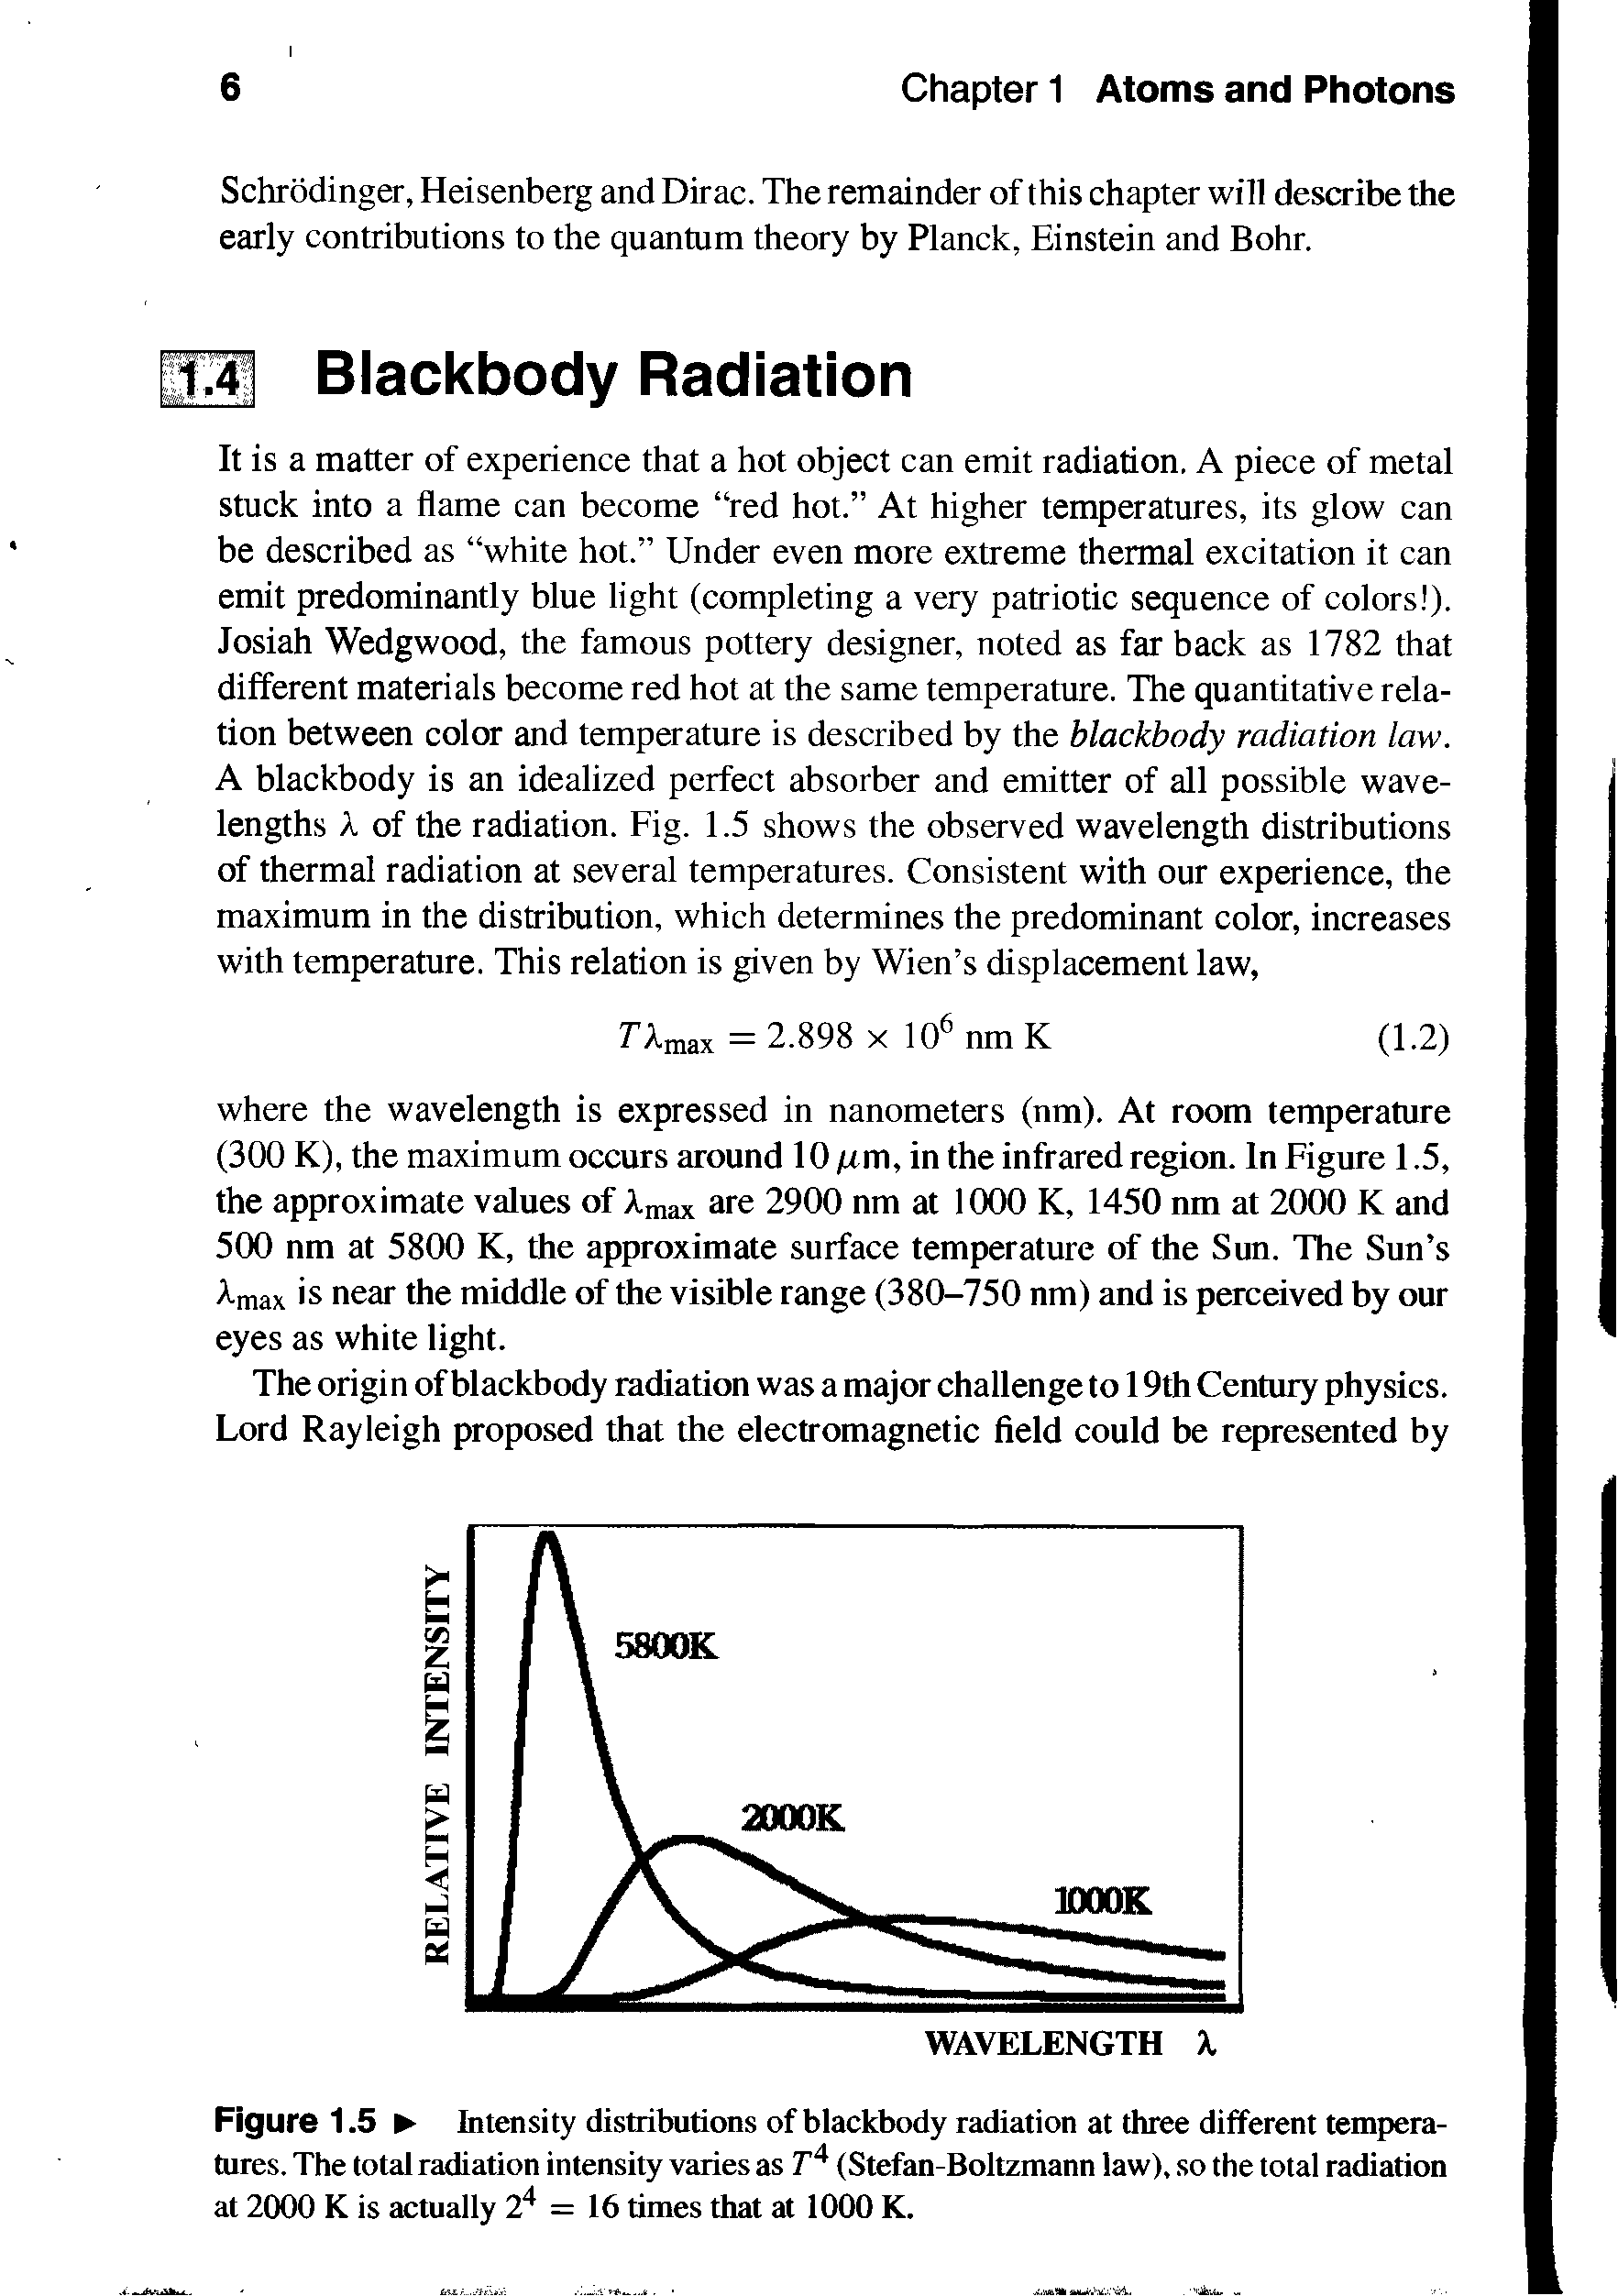 Figure 1.5 Intensity distributions of blackbody radiation at three different temperatures. The total radiation intensity varies as (Stefan-Boltzmann law), so the total radiation at 2000 K is actually 2 = 16 times that at 1000 K.